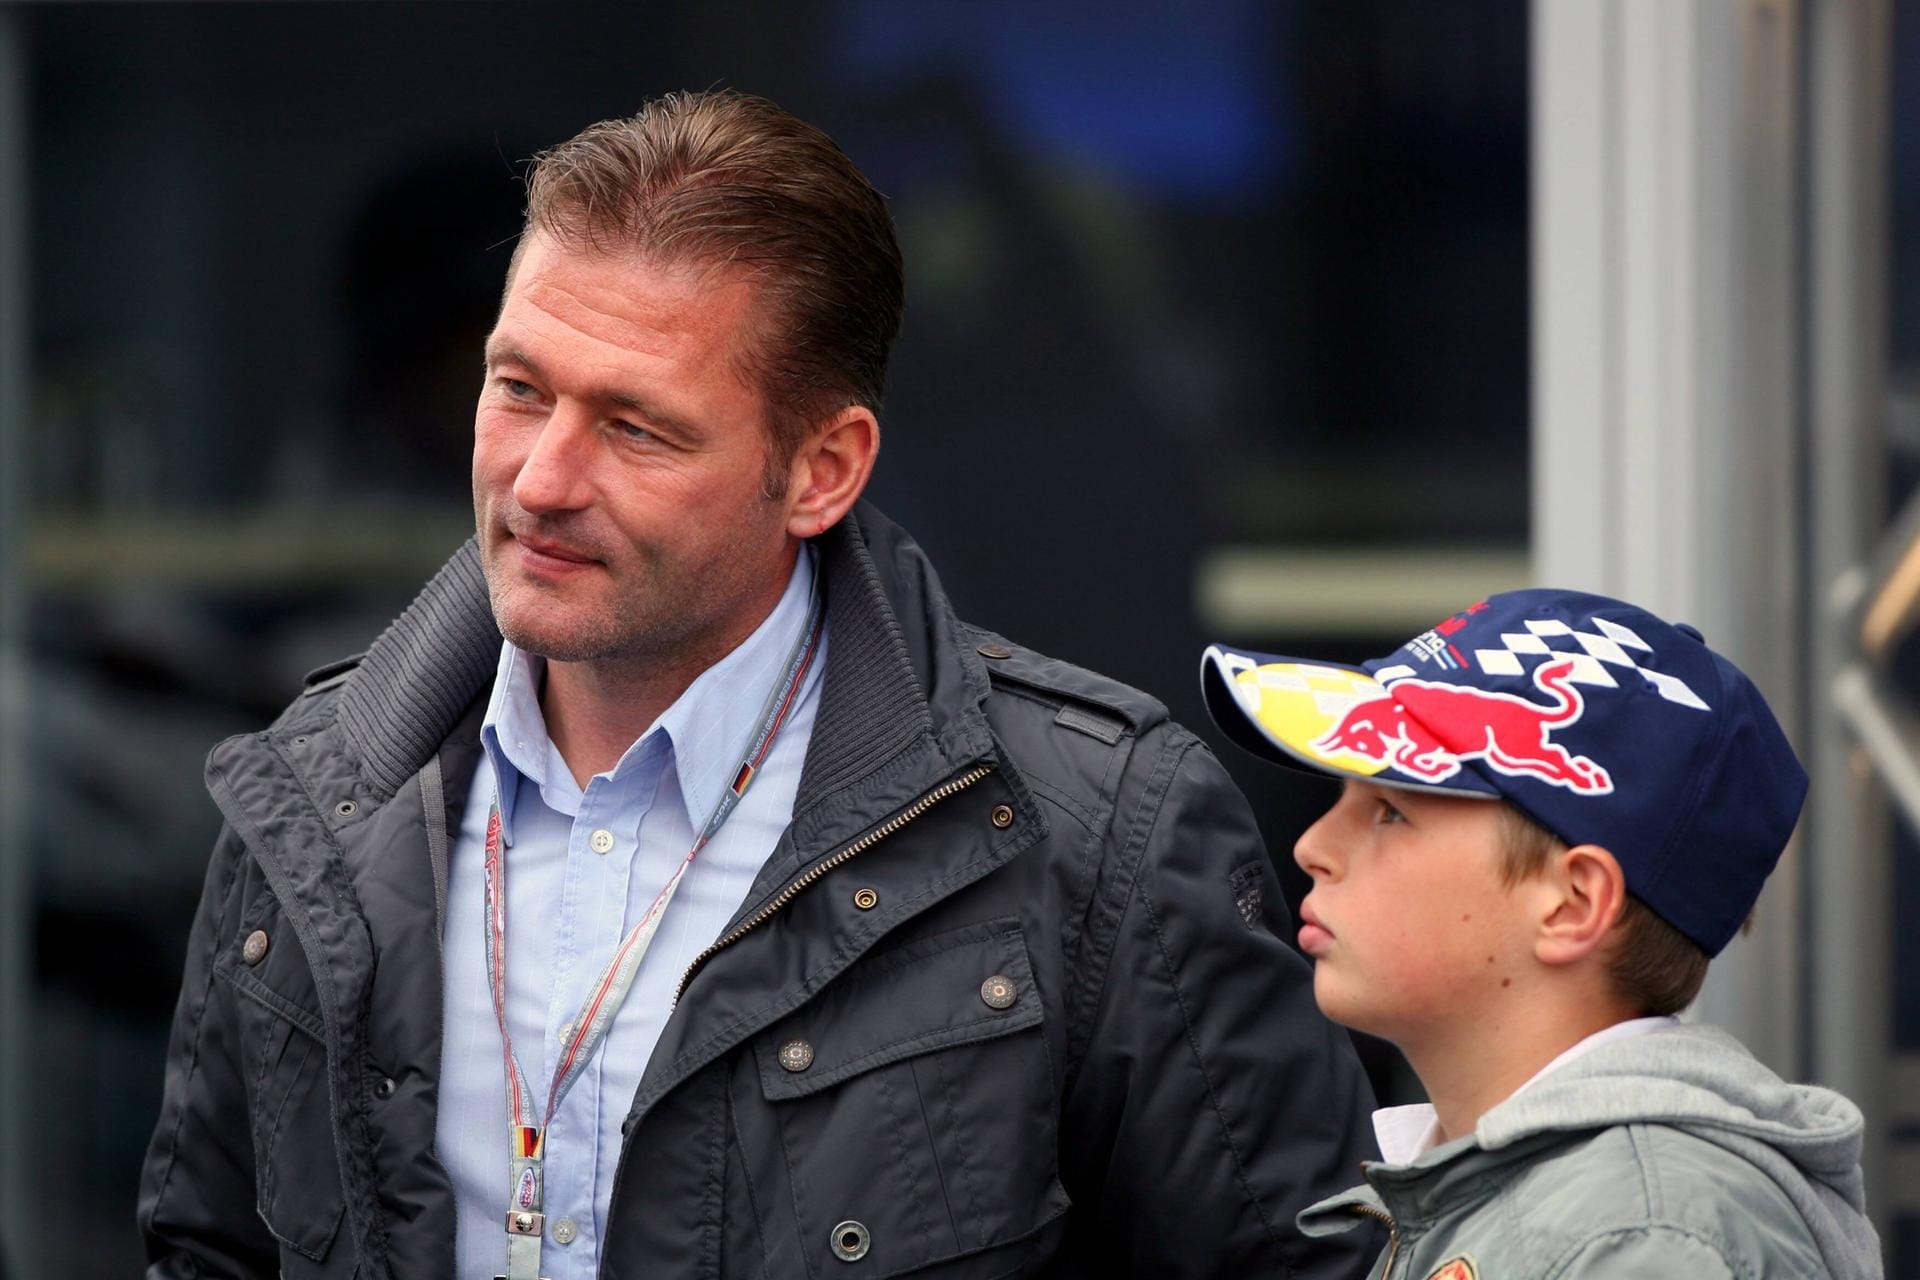 Jos Verstappen (NED) Ex-F1 Driver with his son Max Verstappen (NED) Karter. Formula One World Championship, WM, Weltmei